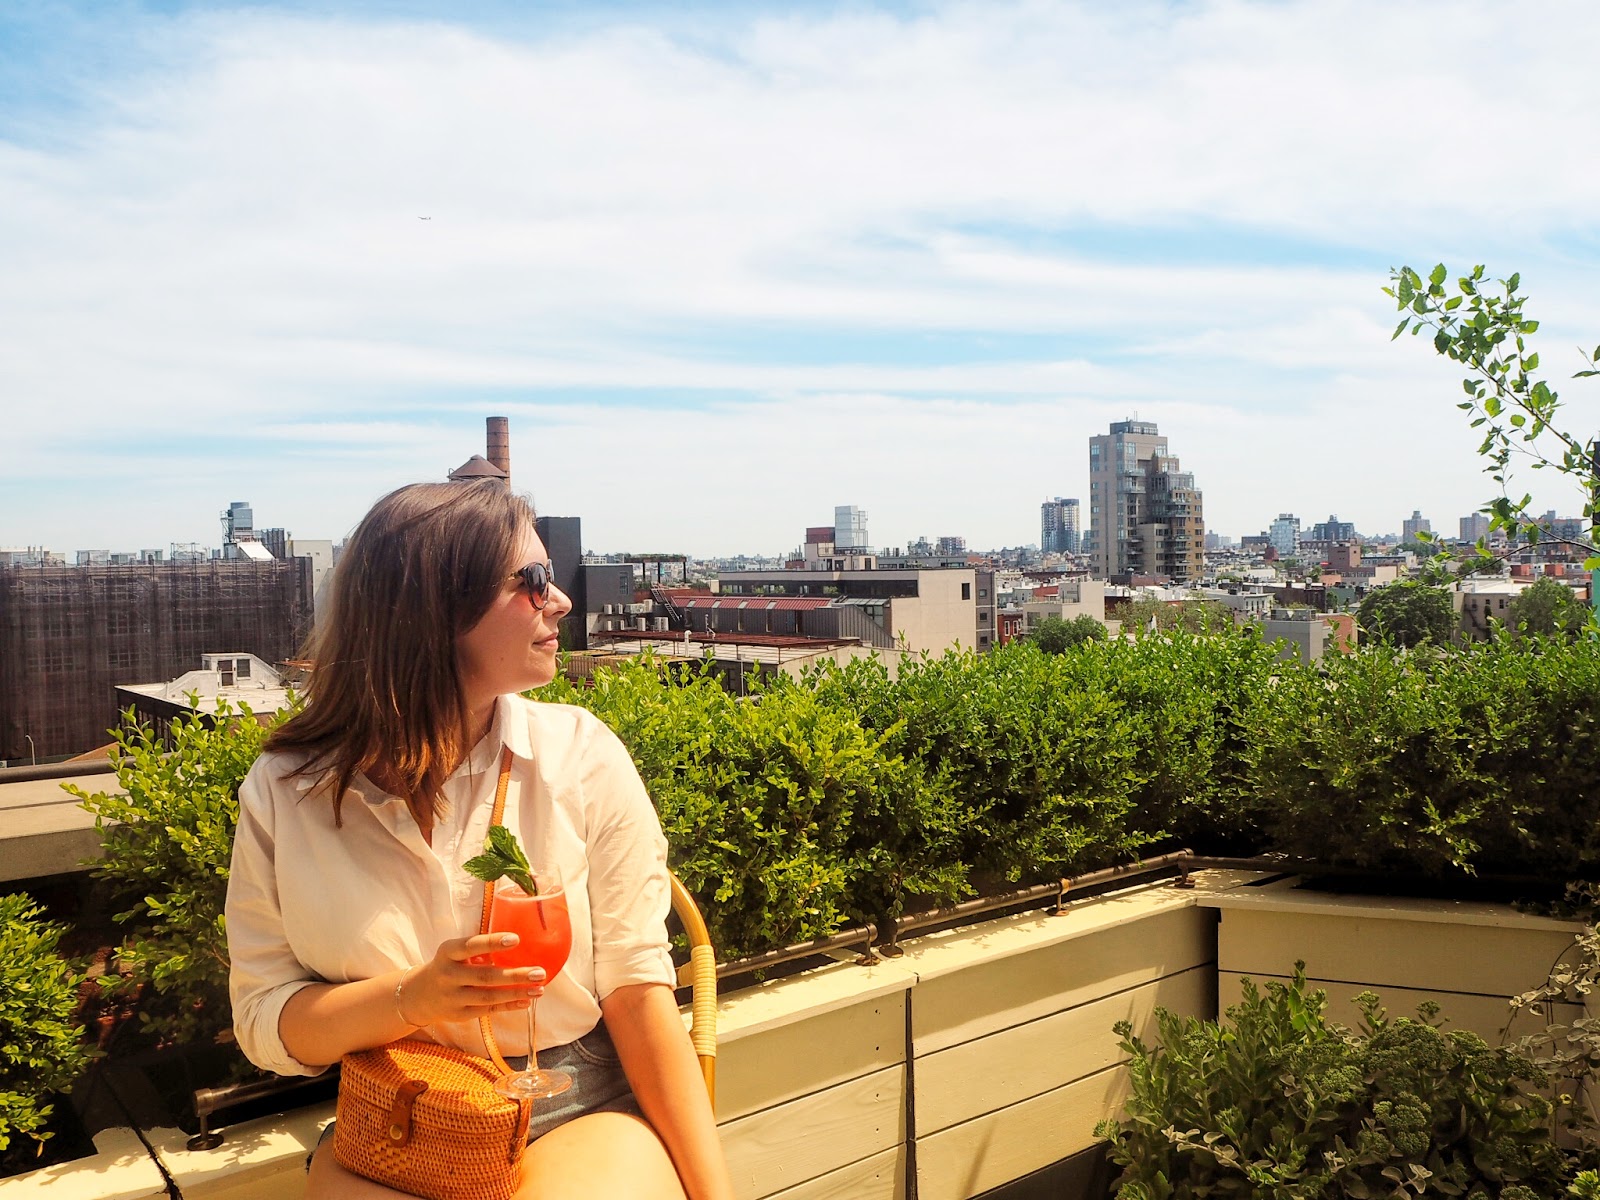 How To Spend A Day In Brooklyn